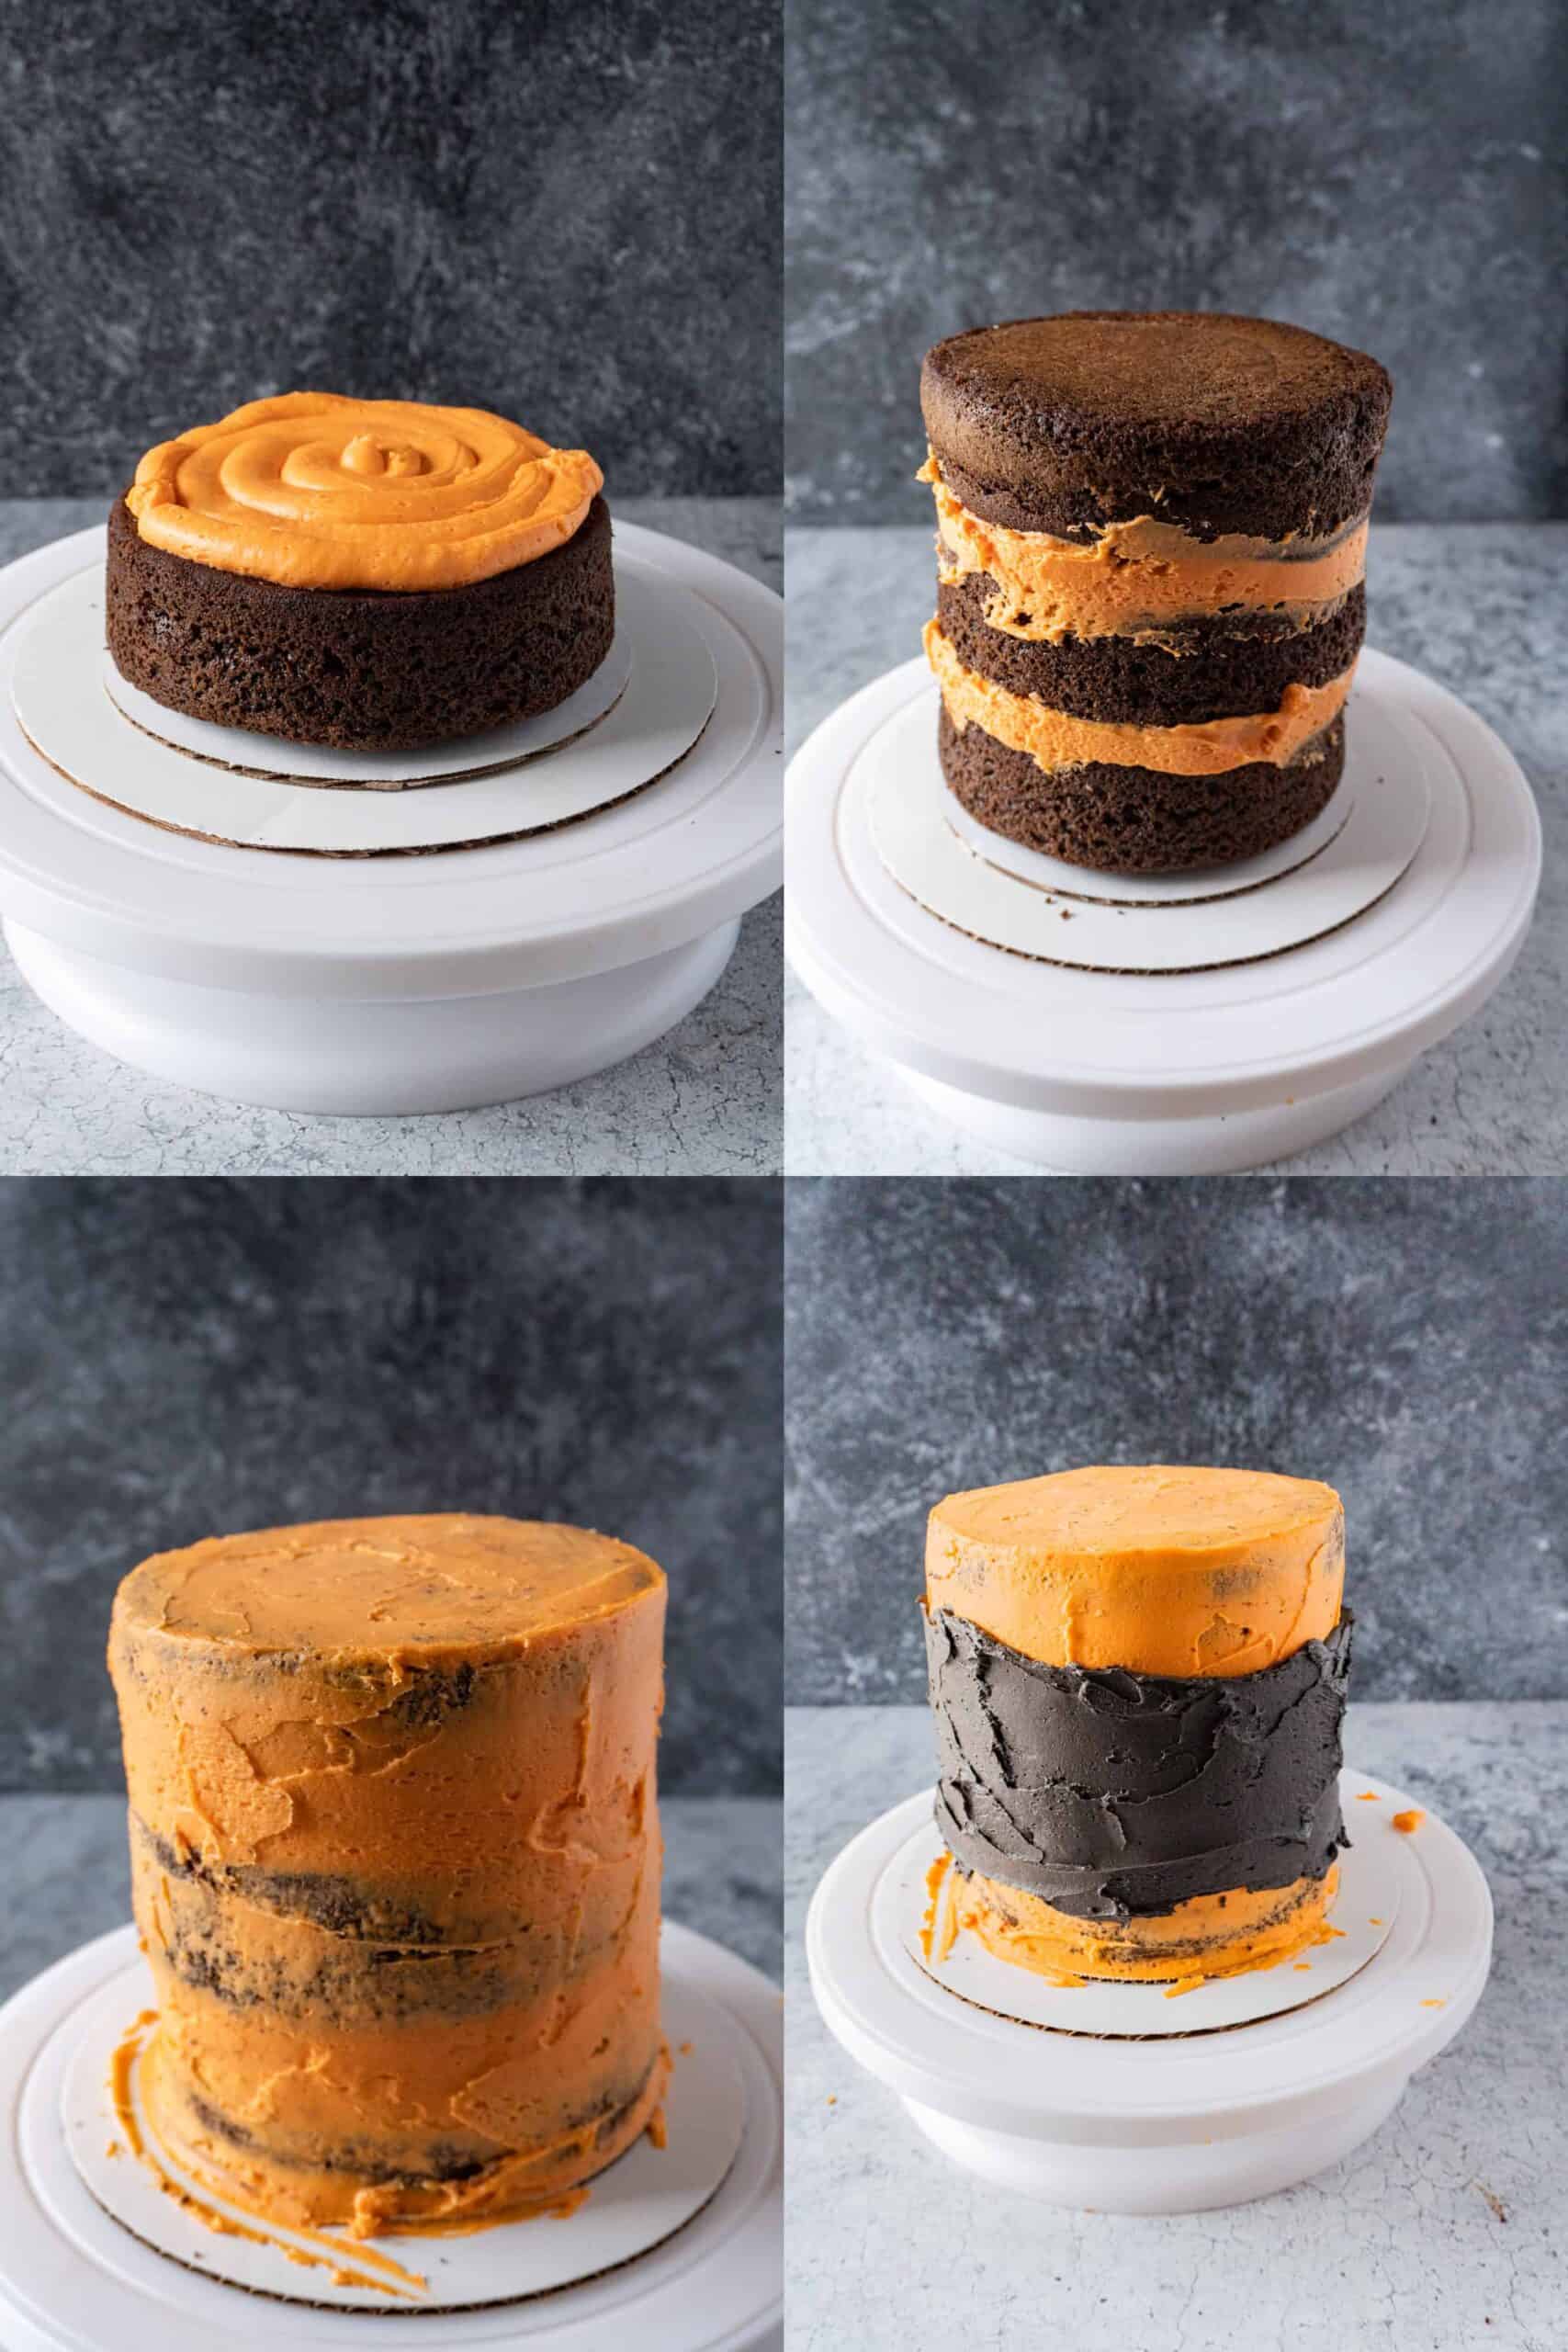 How to frost the cake process photos